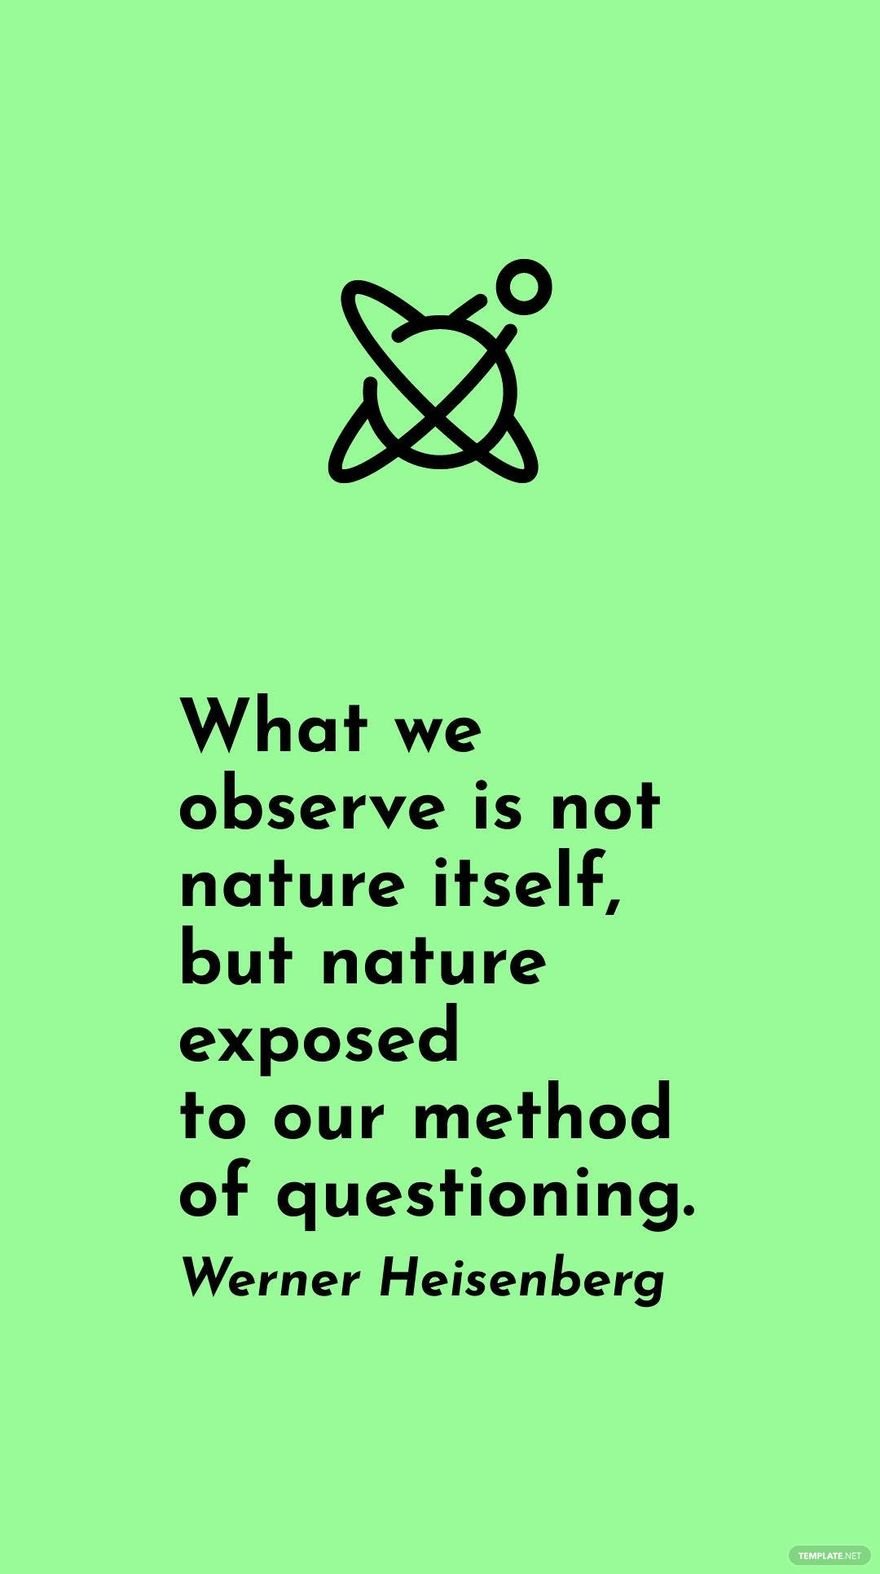 Free Werner Heisenberg - What we observe is not nature itself, but nature exposed to our method of questioning. in JPG